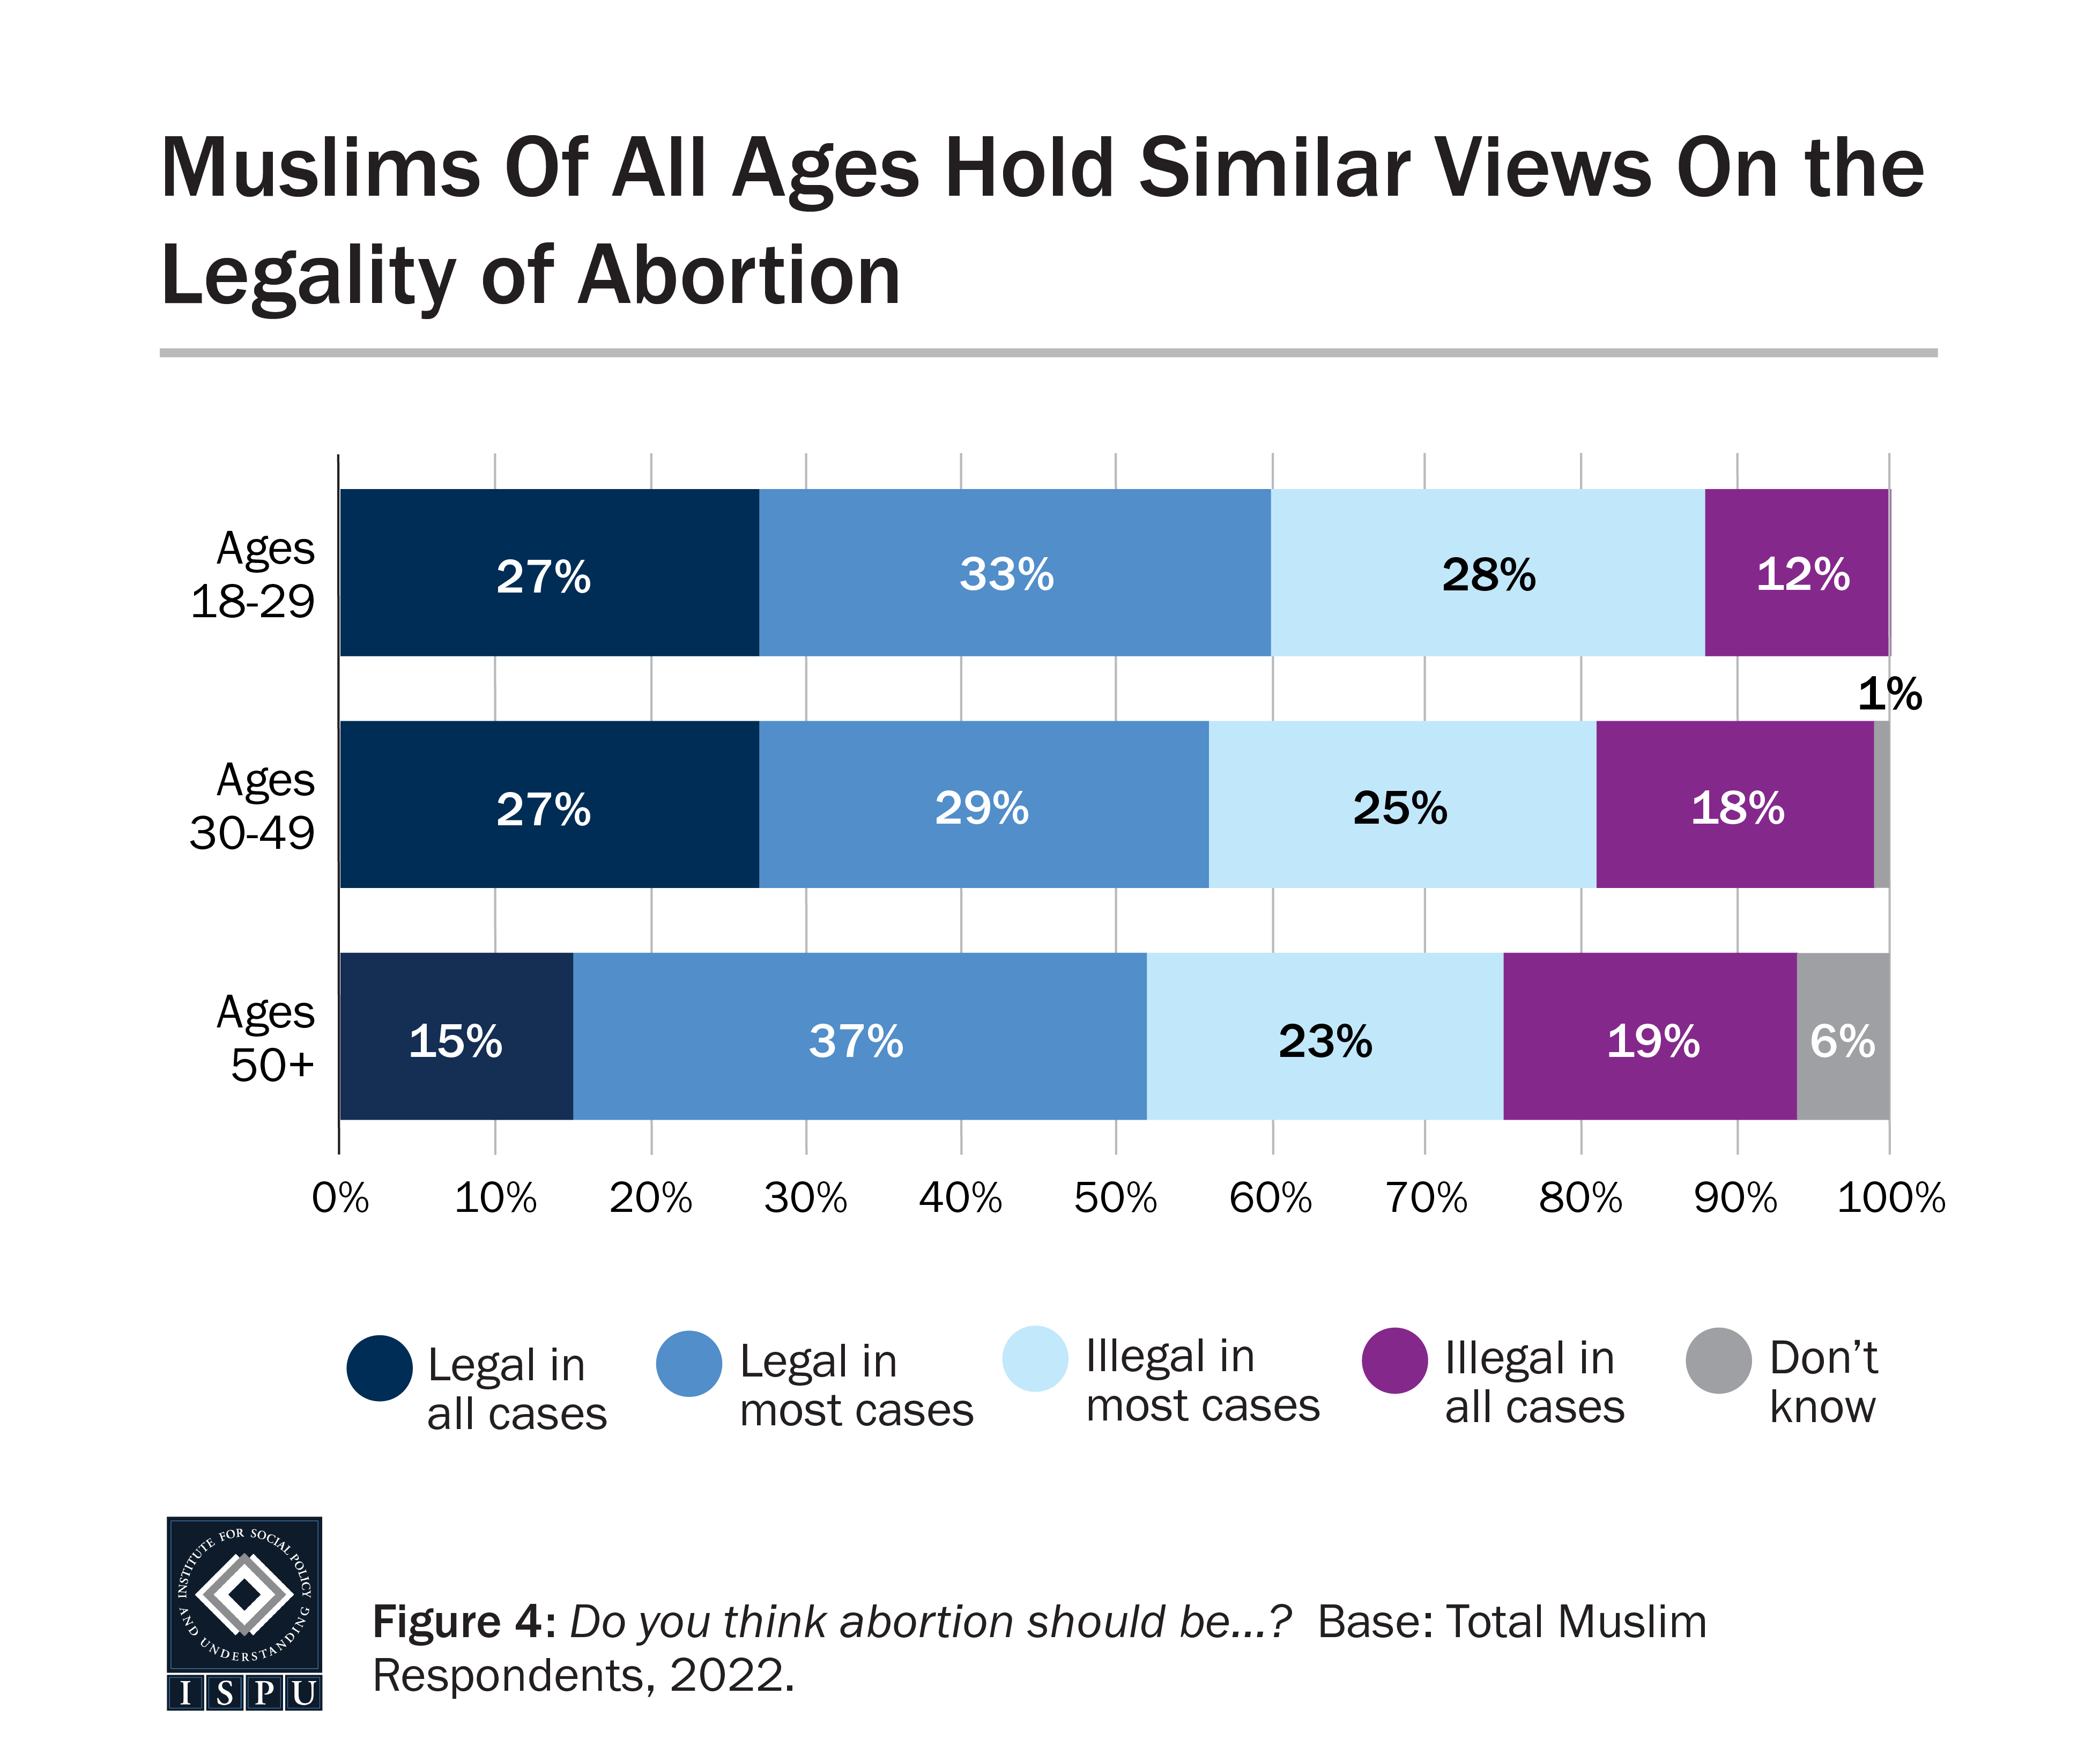 Graph displaying: Muslims of all ages similar on views on abortion legality, with ages 18-29 least likely to believe abortion should be illegal in all cases.